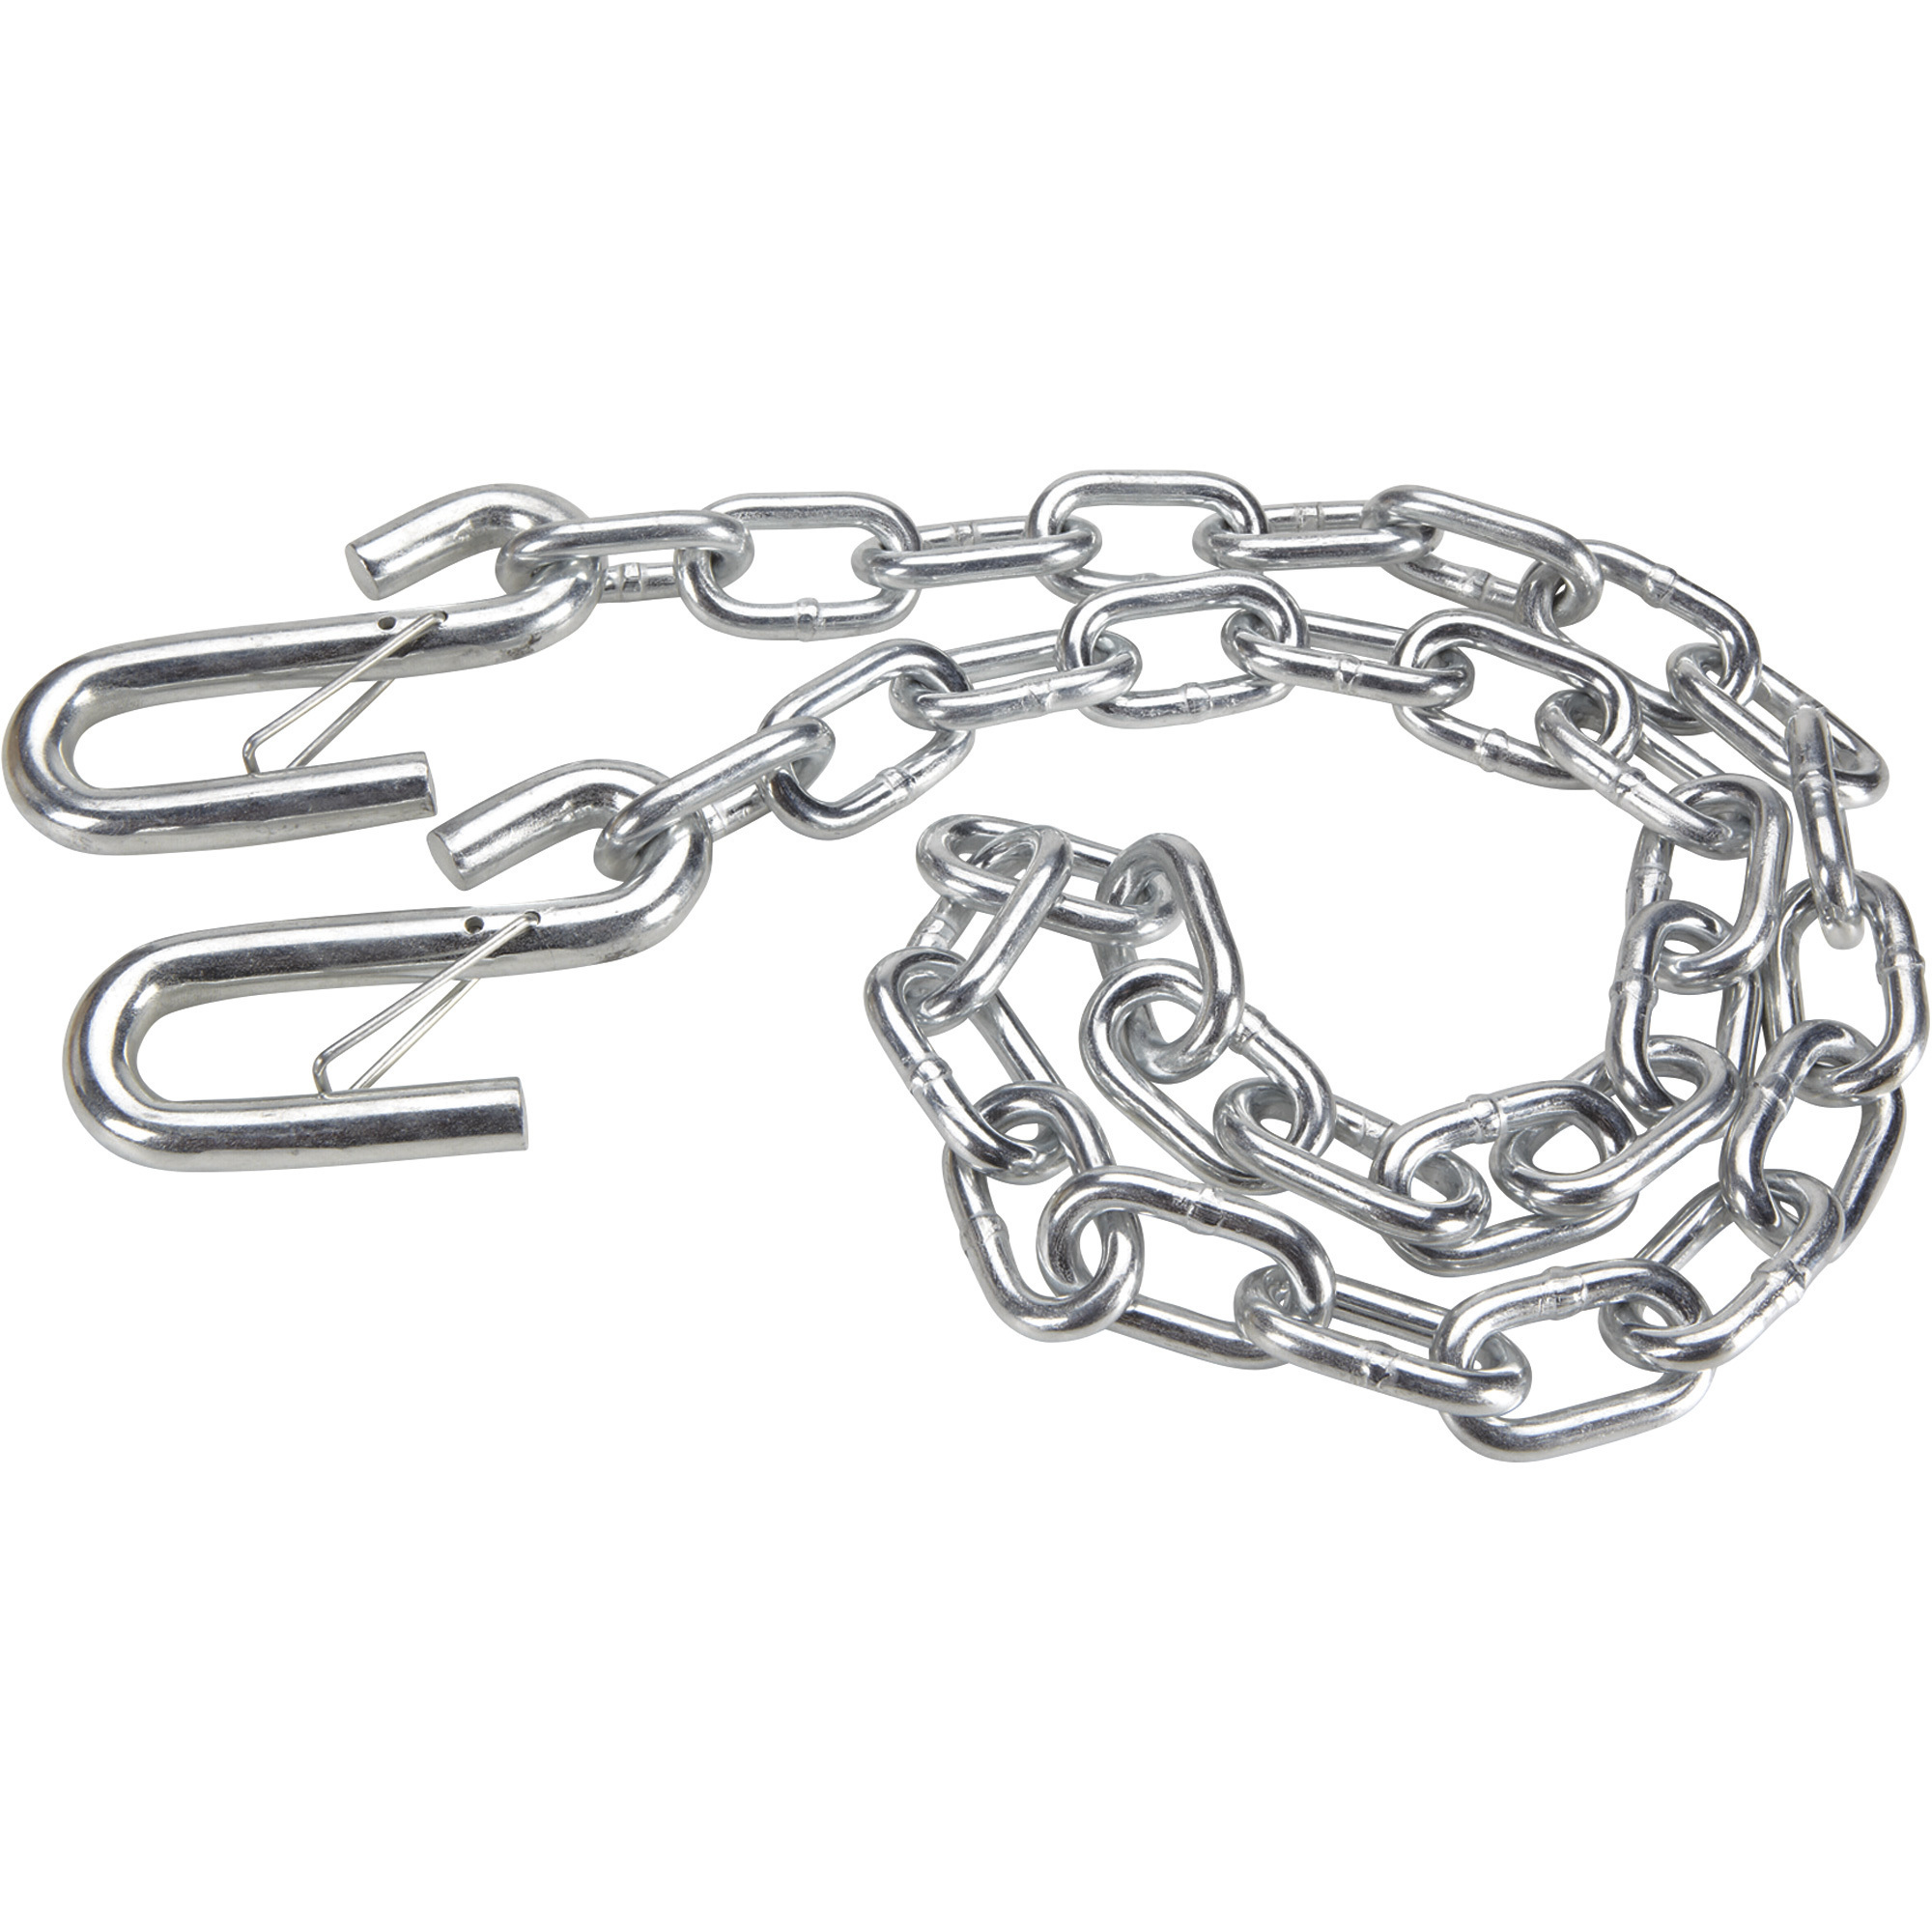 Ultra-Tow Safety Tow Chain with S-Hook - 1/4in. x 48in. Chain, 2,000-Lb. Capacity